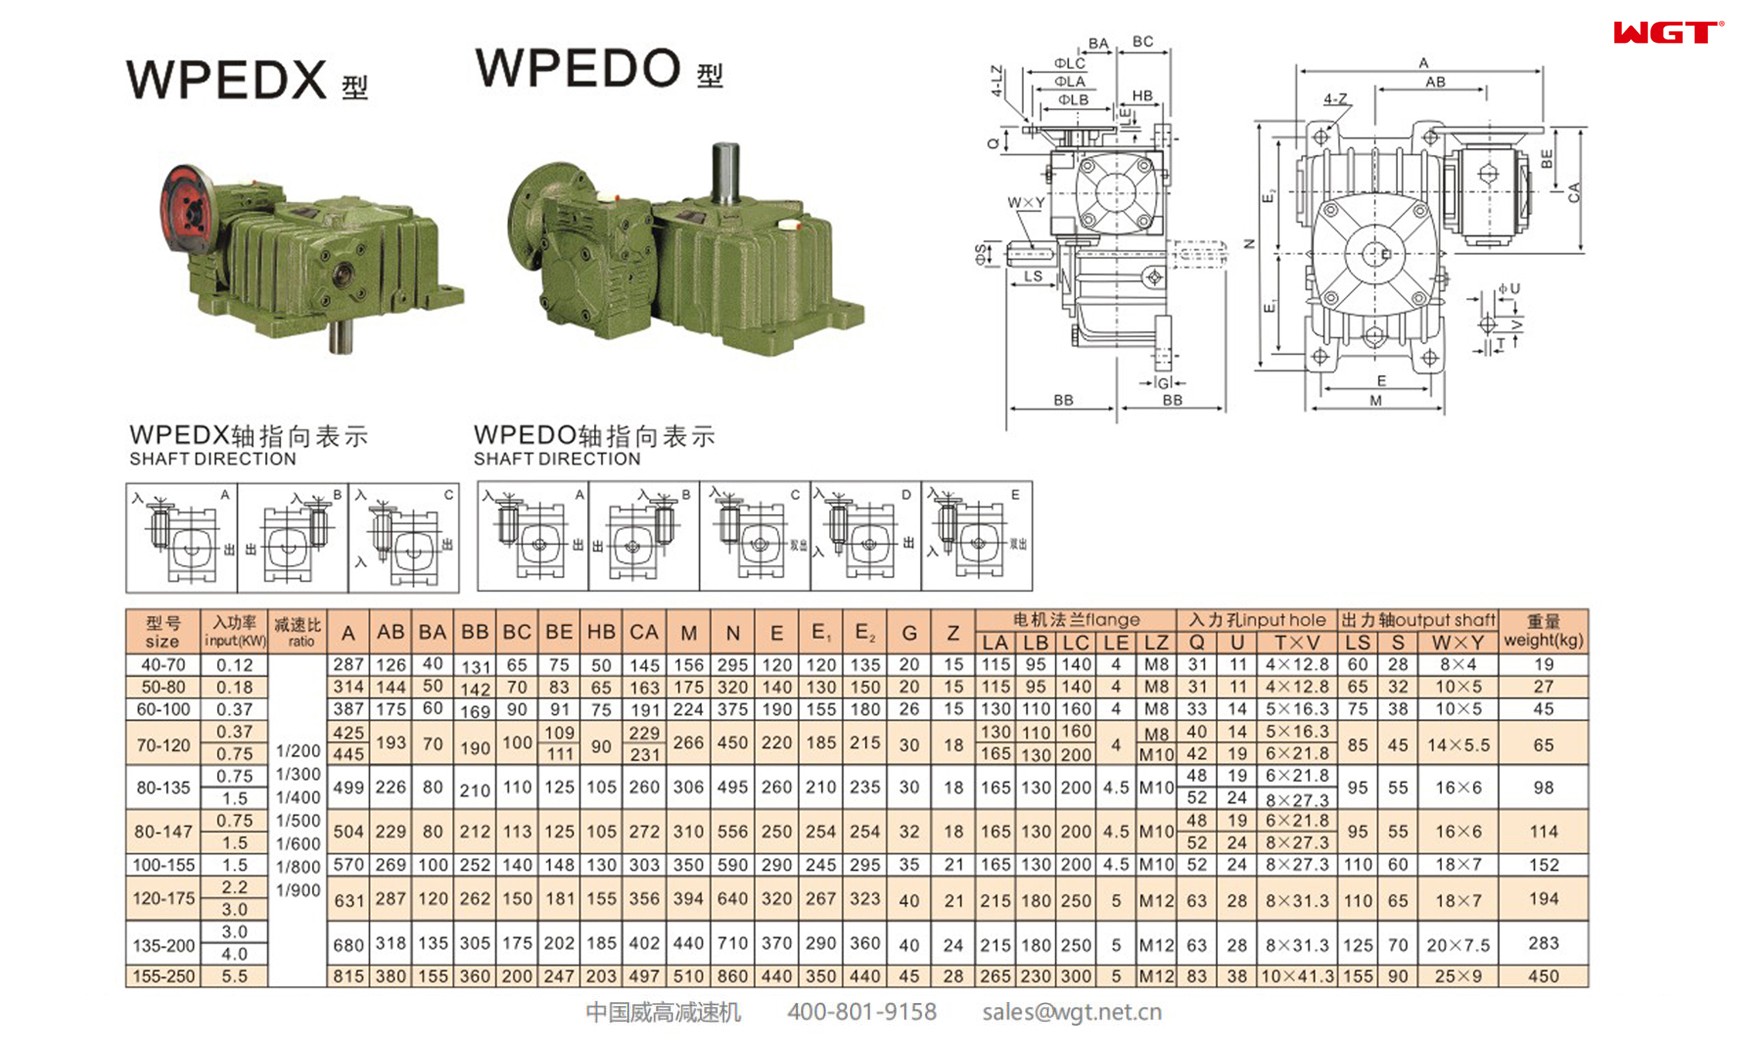 WPEDX80-147 worm gear reducer double speed reducer